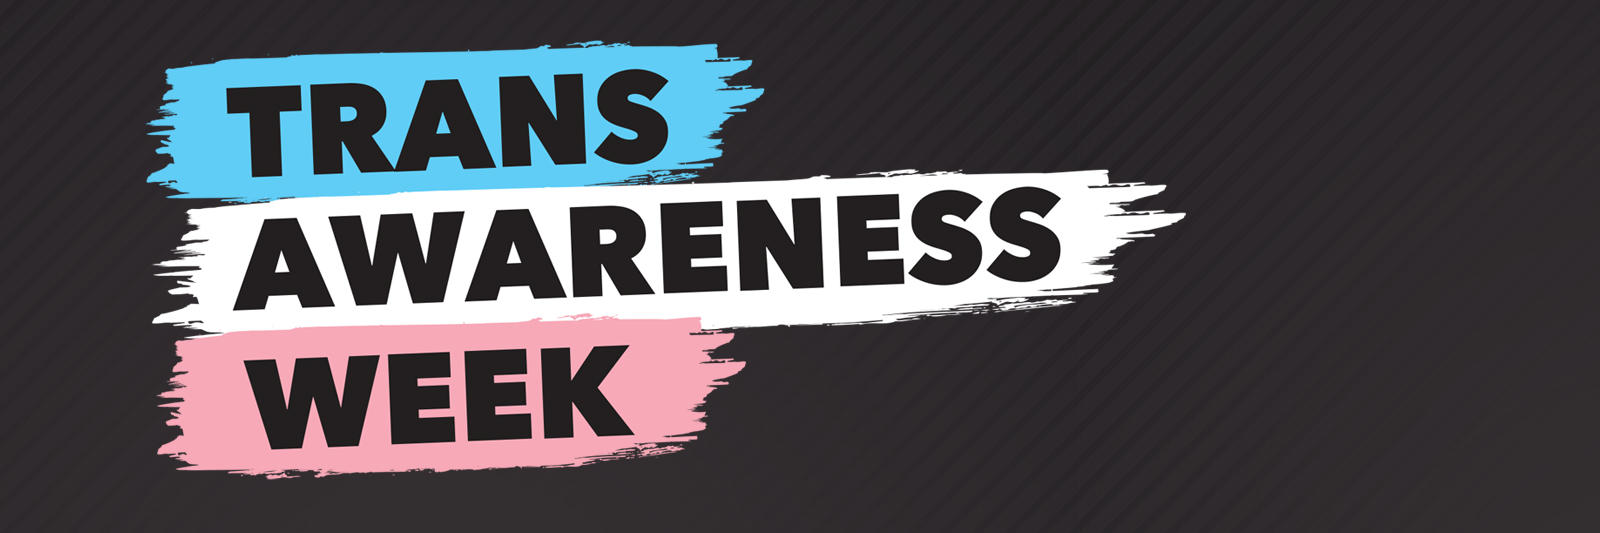 A blue brush stroke with "Trans" written in black; a white brush stroke with "Awareness" written in black; a pink brush stroke with "Week" written in black, accompanied by the Office of Student Inclusion and Diversity Logo